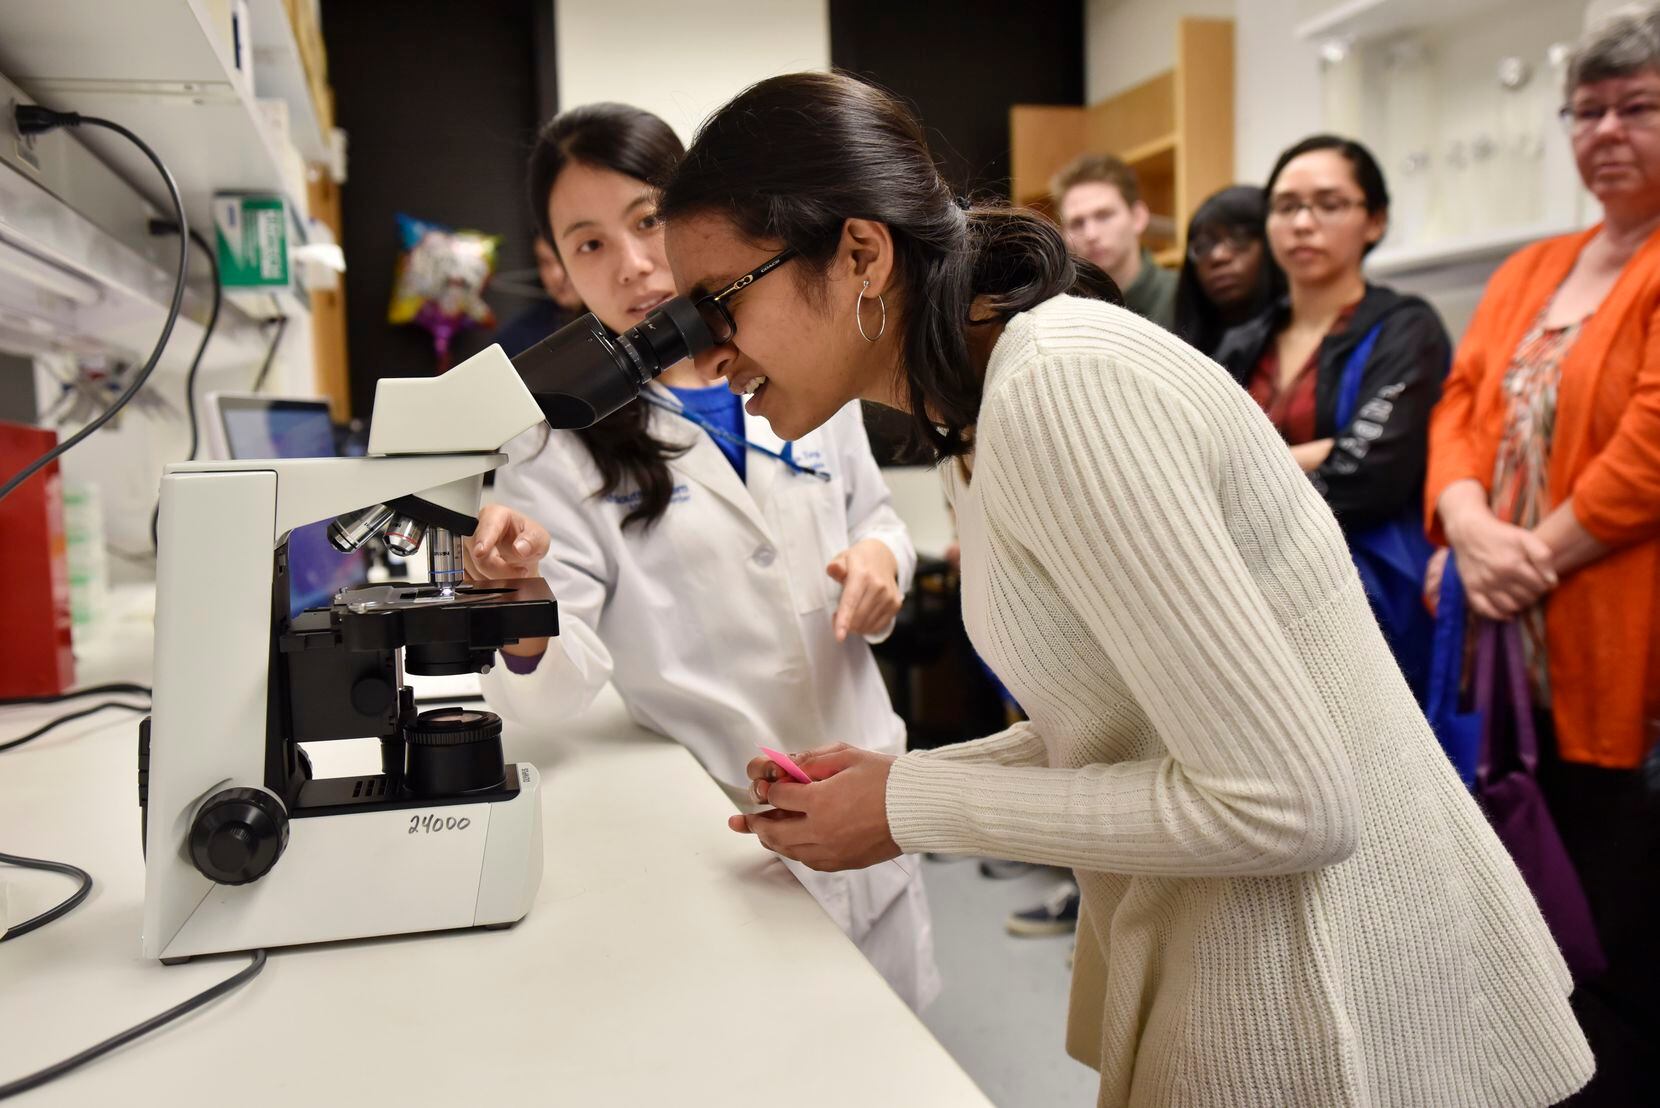 In years past, UT Southwestern welcomed Science in the City participants such
as Priya...